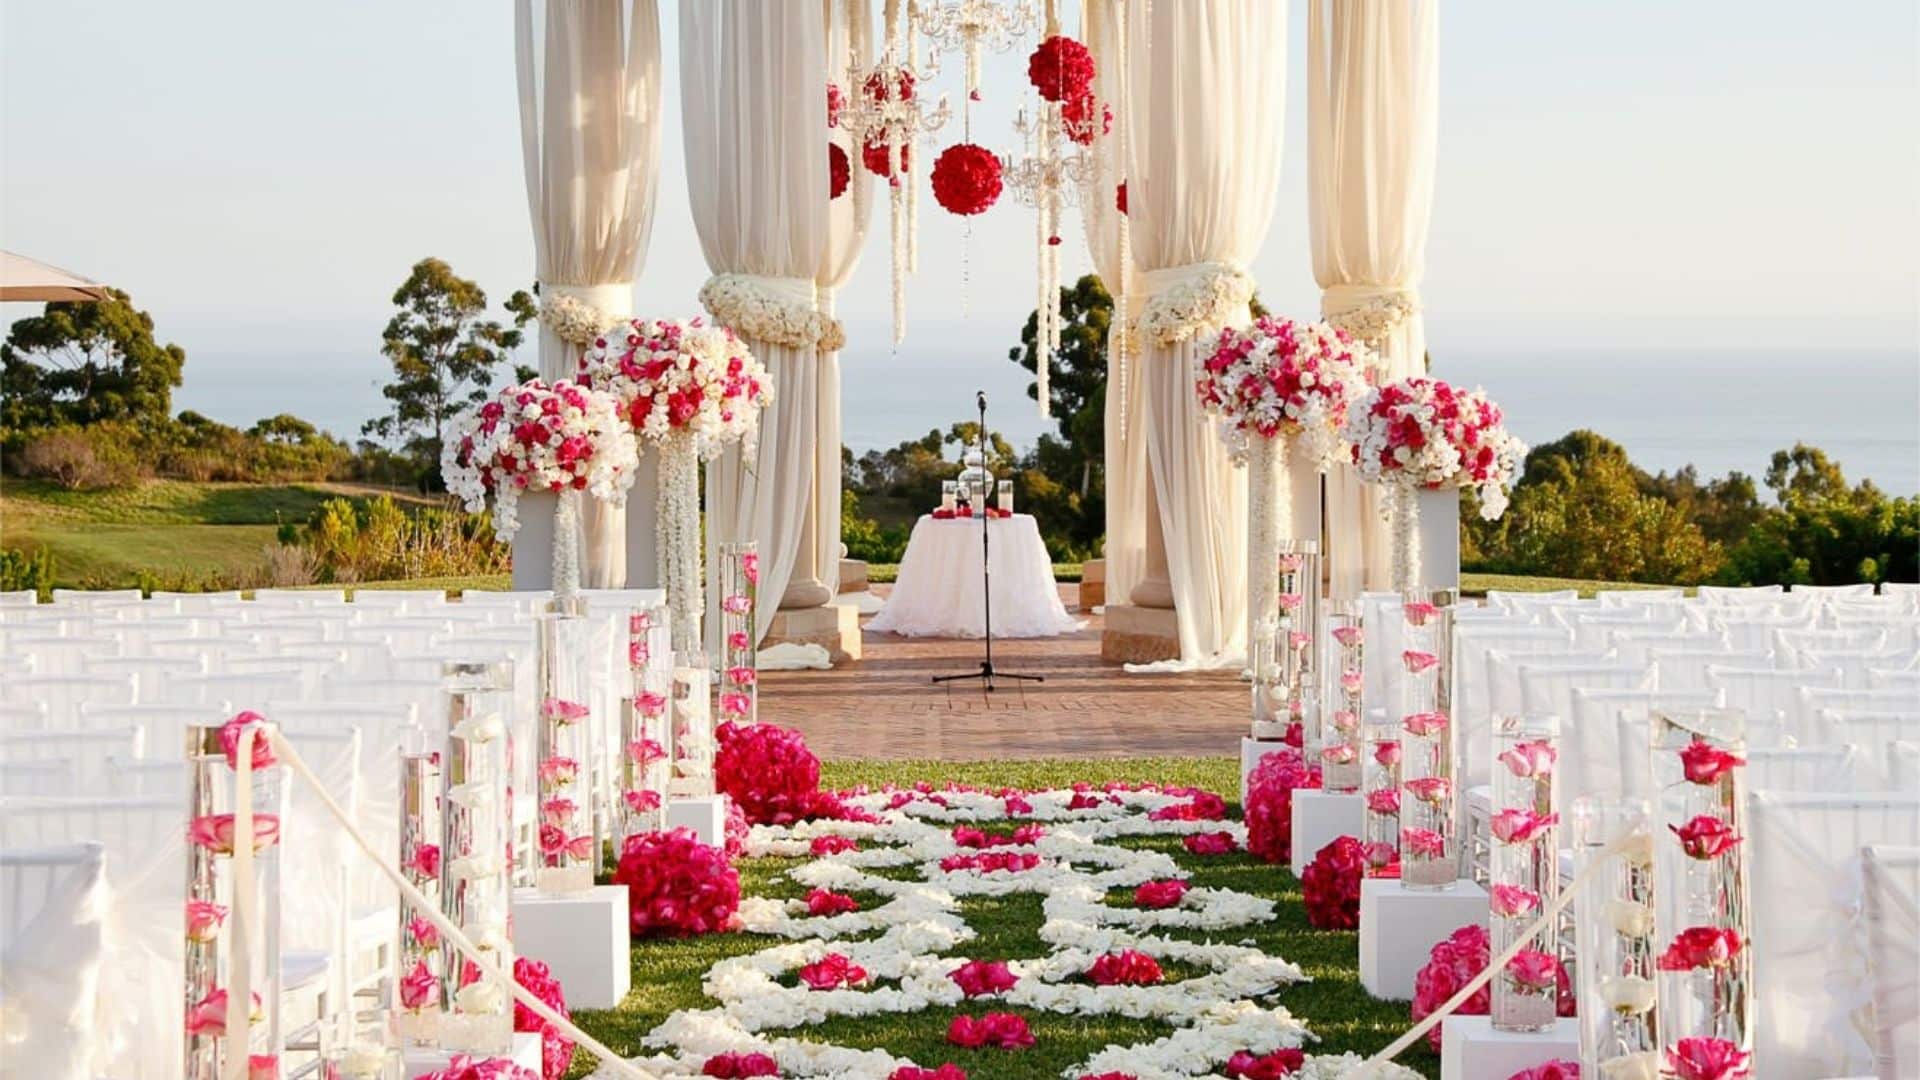 What Are the Latest Trends in Wedding Decorations